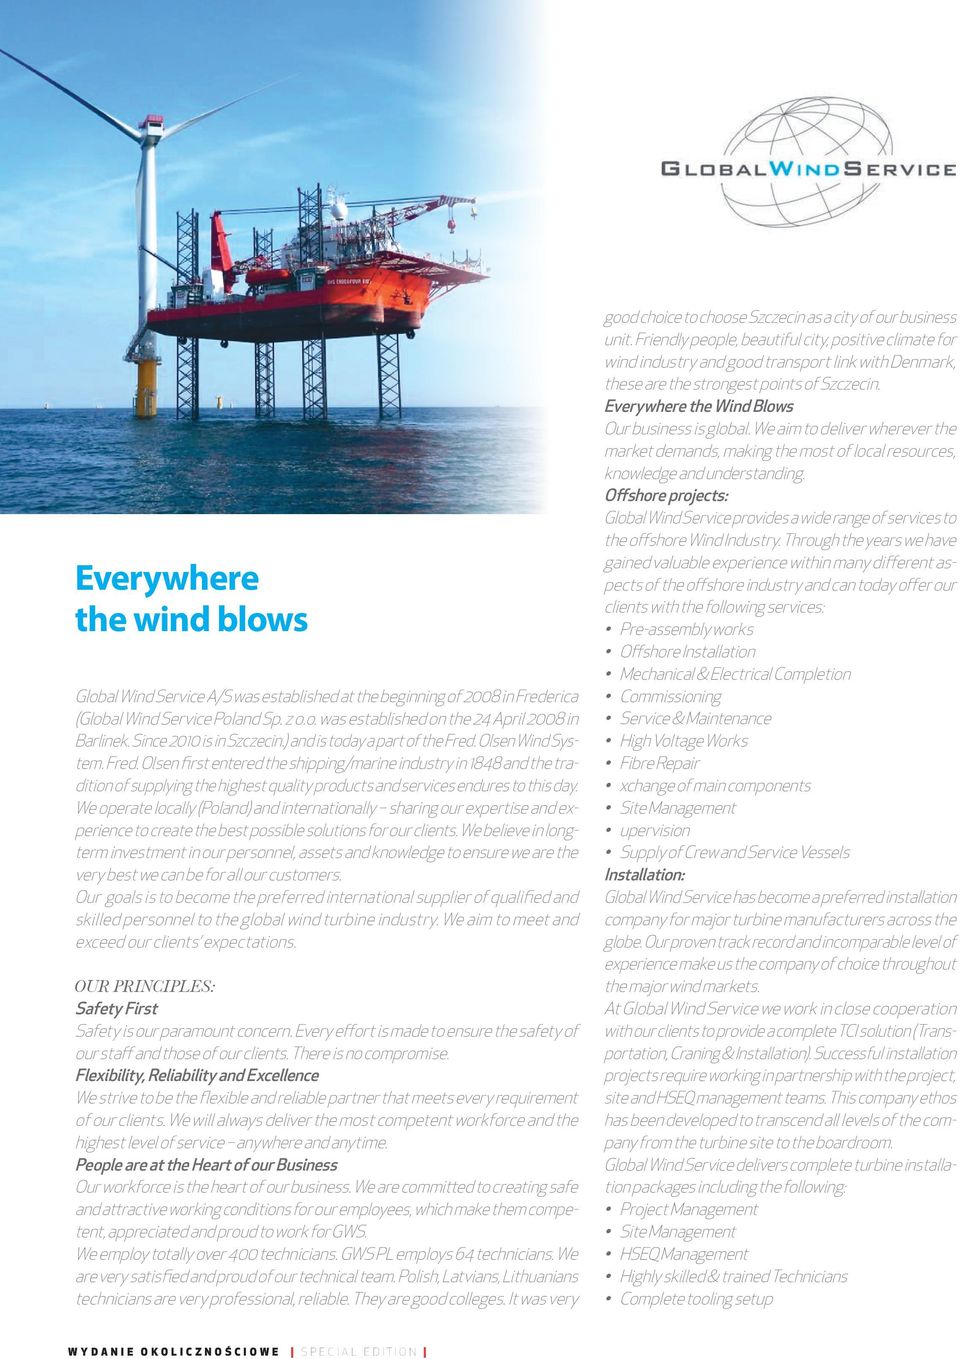 Olsen Wind System. Fred. Olsen first entered the shipping/marine industry in 1848 and the tradition of supplying the highest quality products and services endures to this day.